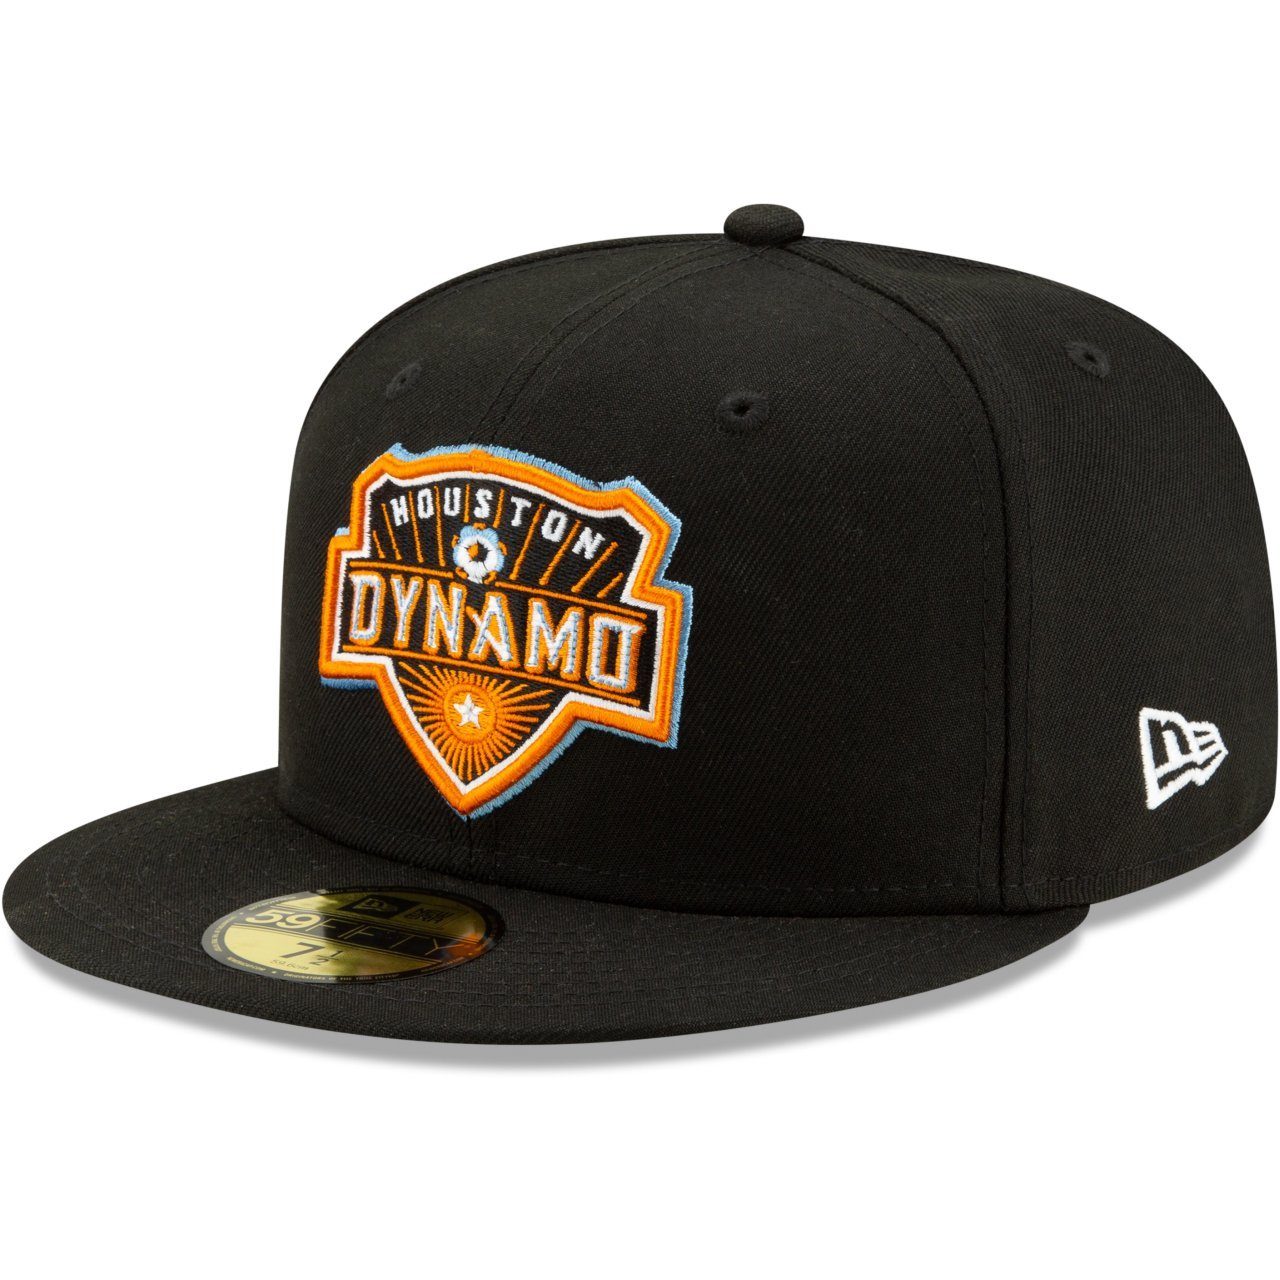 New Era Fitted Cap 59Fifty MLS Houston Dynamo | Fitted Caps